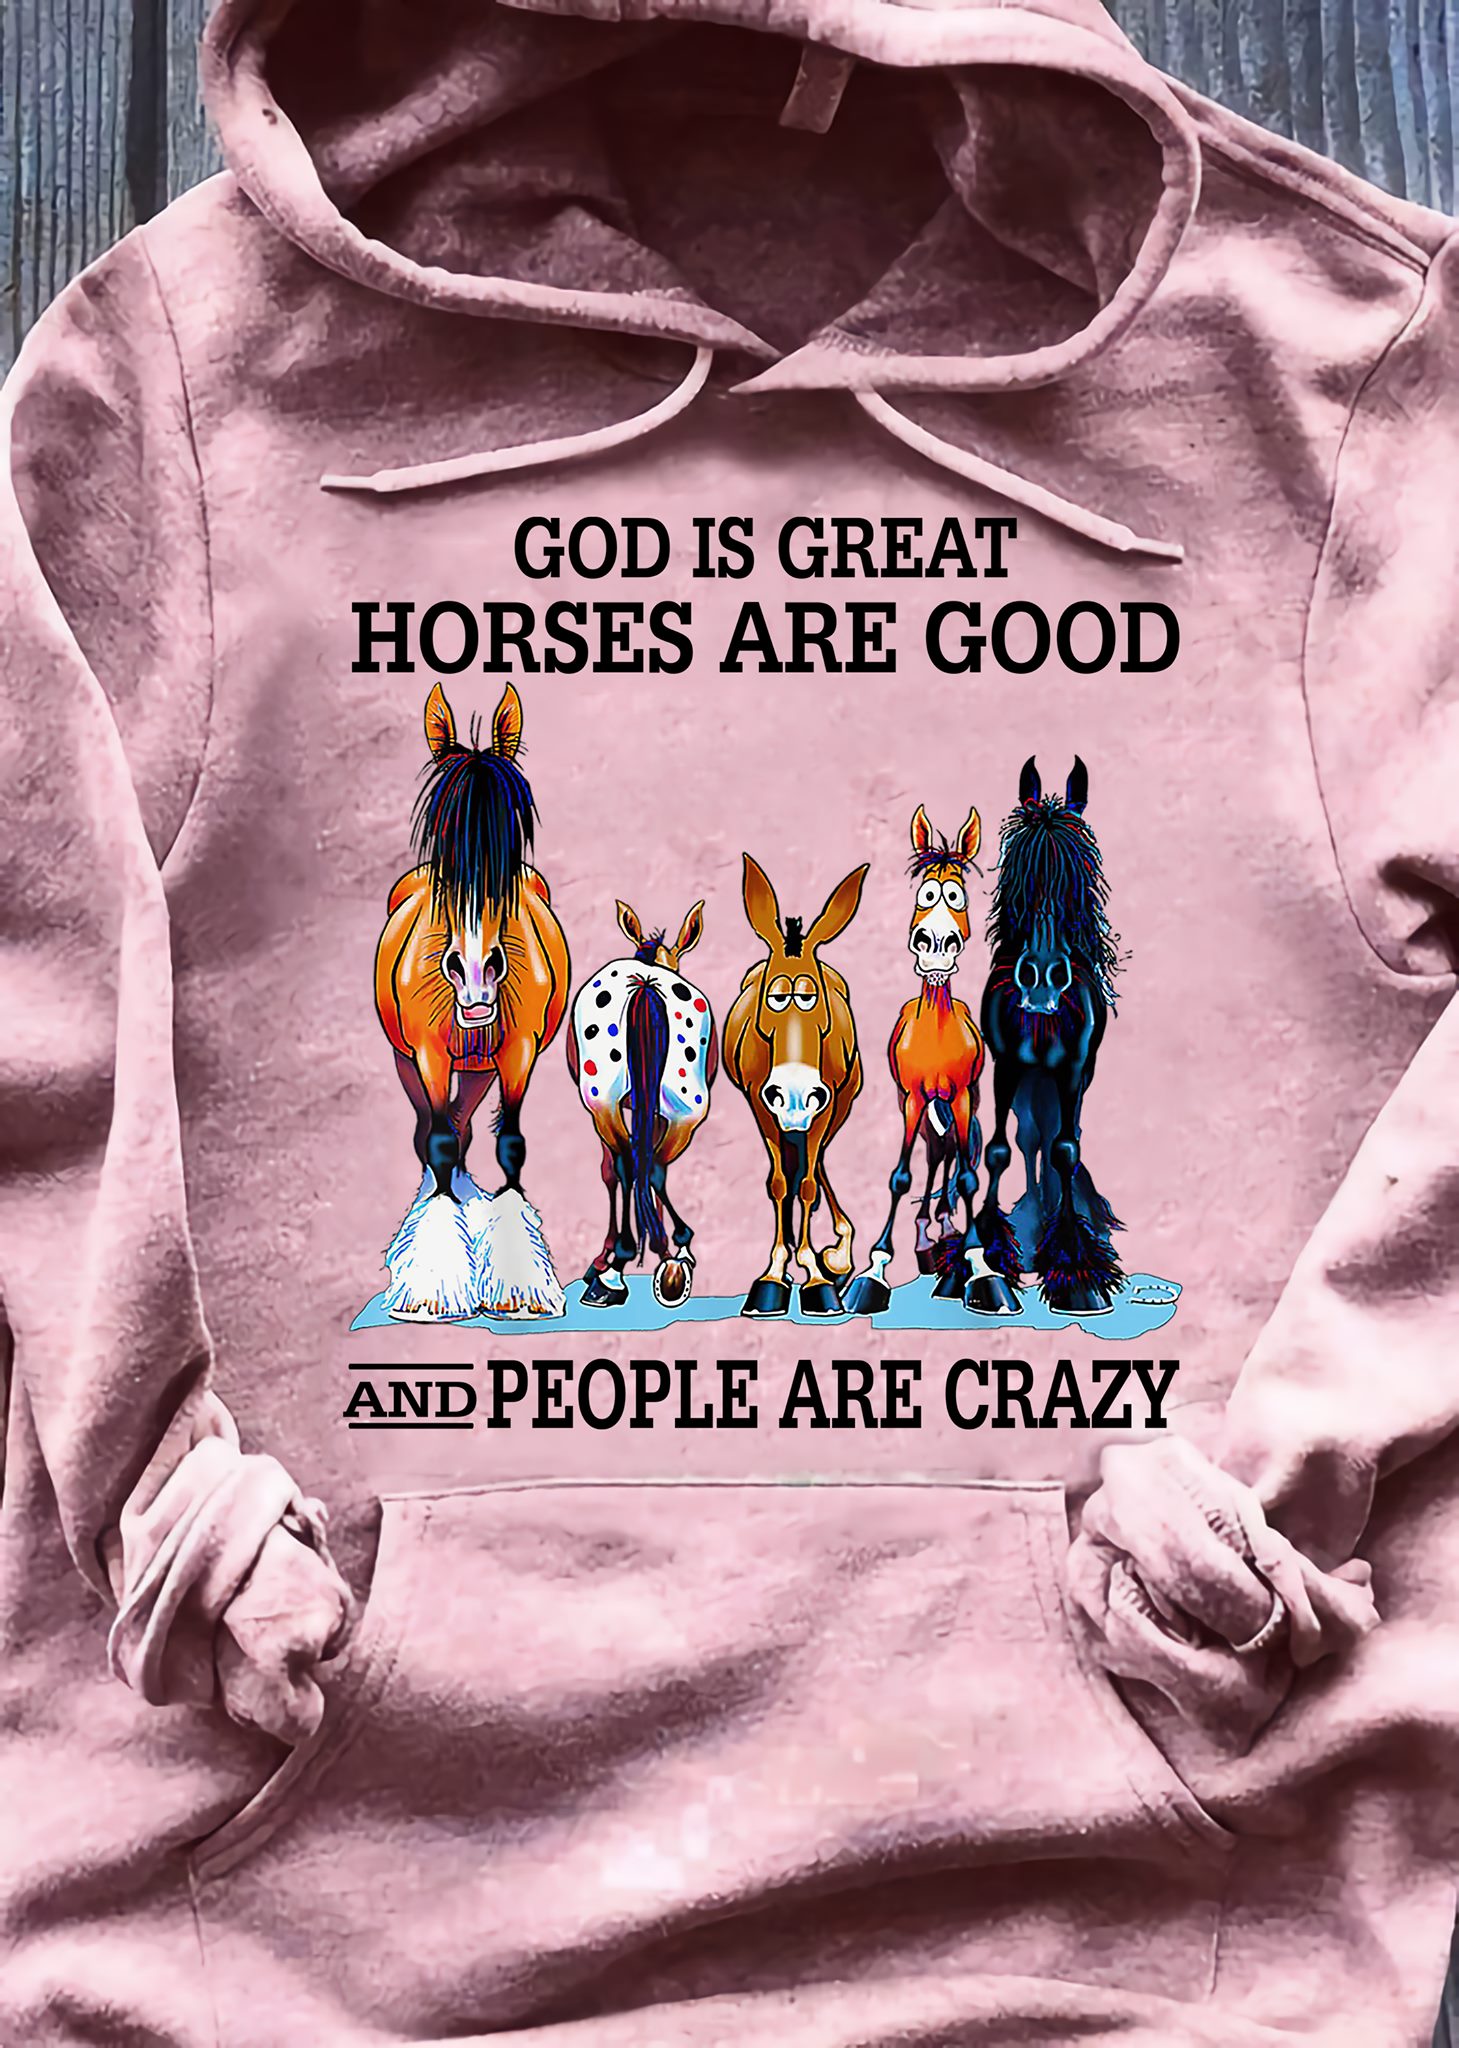 God is great - Horses are good and people are crazy